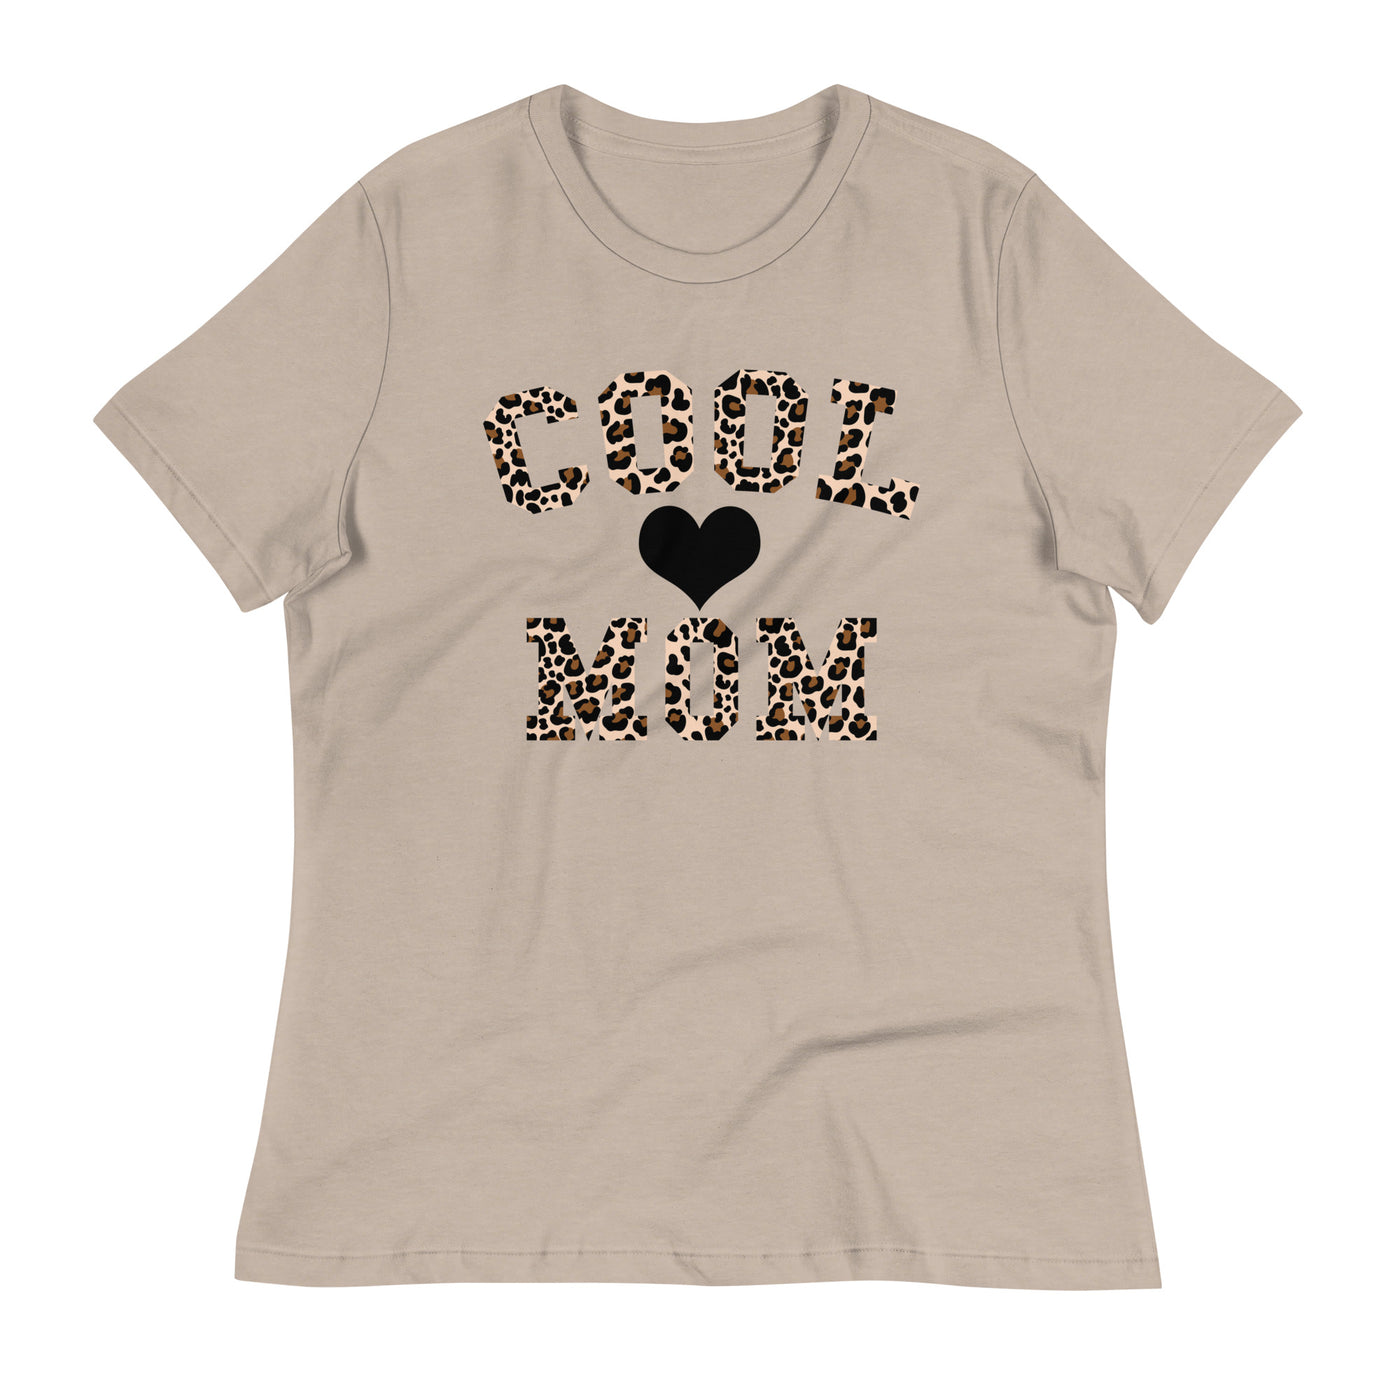 'Cool Mom' leopard print women's relaxed tee